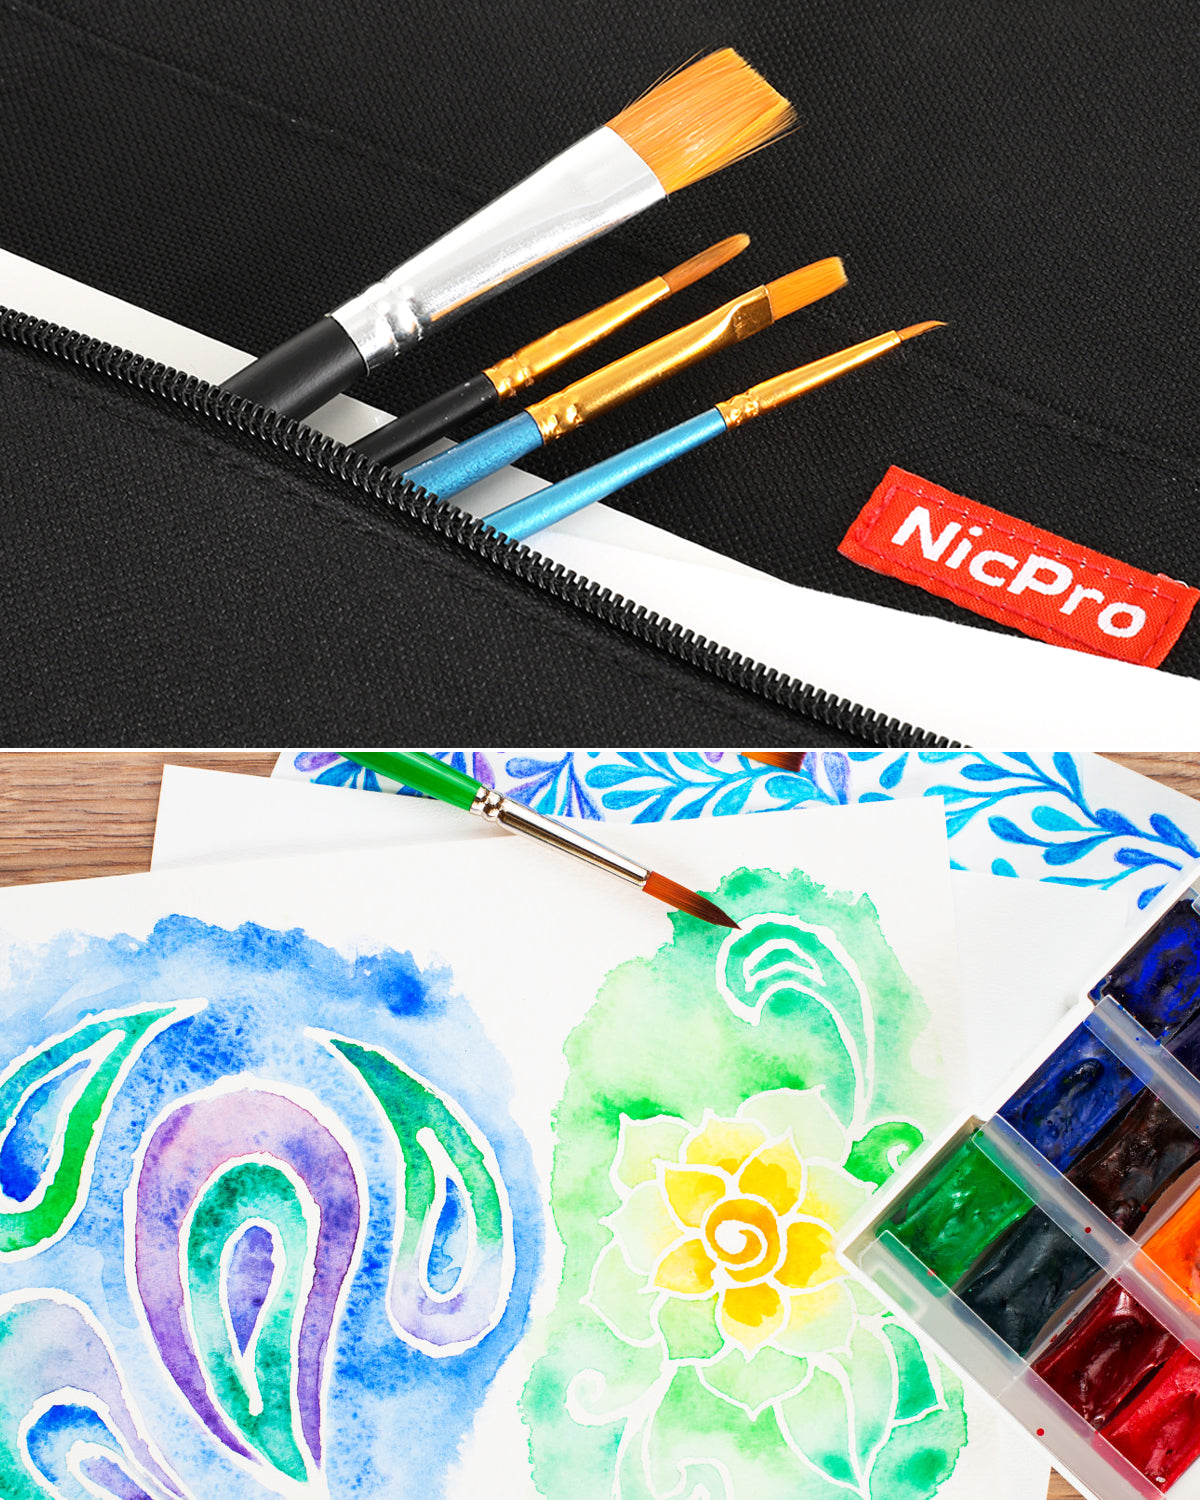 Nicpro Large Art Portfolio Bag 35 x 43 Inches Waterproof Nylon Artist Storage Case with Shoulder Strap, Storage Carrying Bag for Professional Artwork